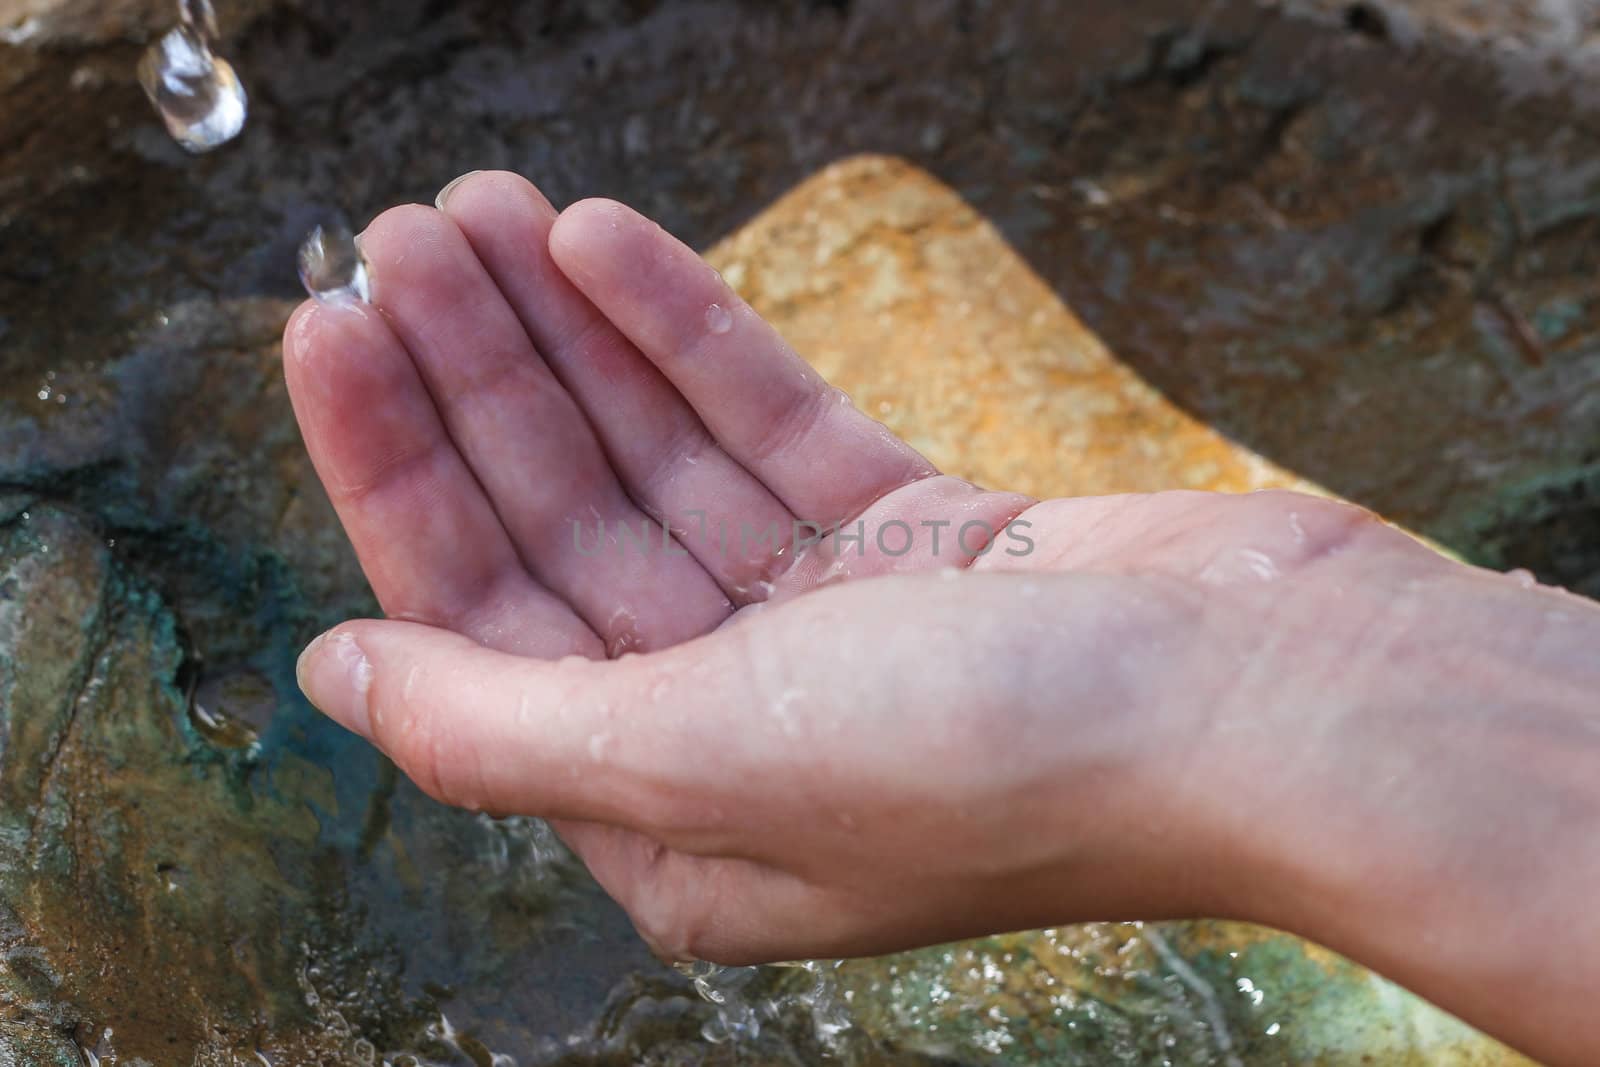 Water coming out of tab and splashing into hand